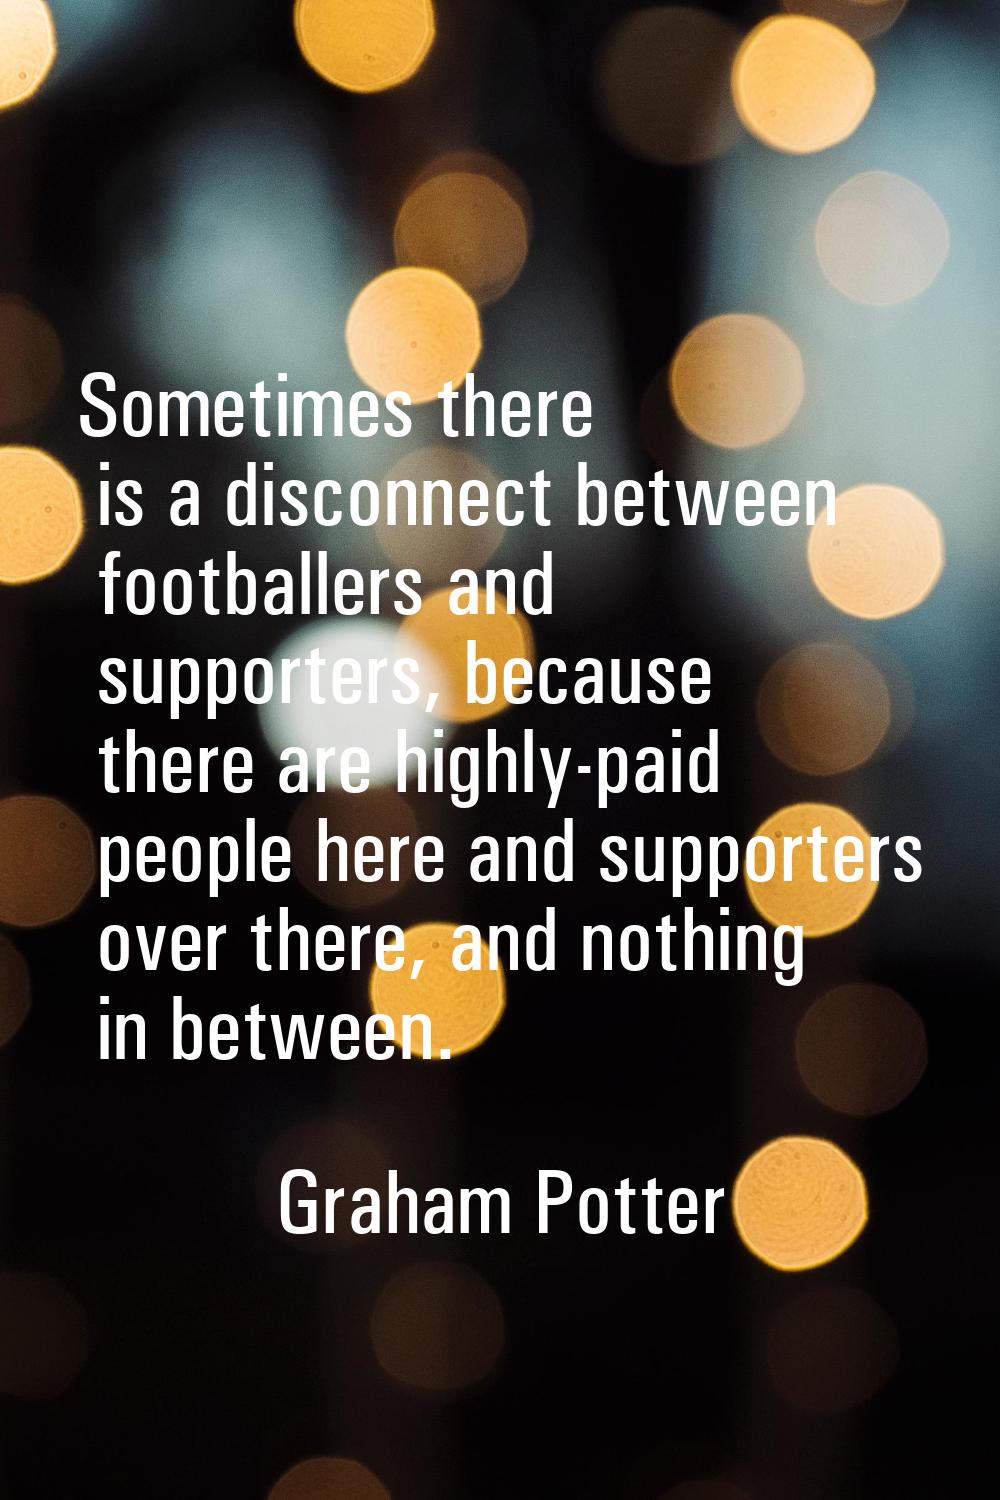 Sometimes there is a disconnect between footballers and supporters, because there are highly-paid p